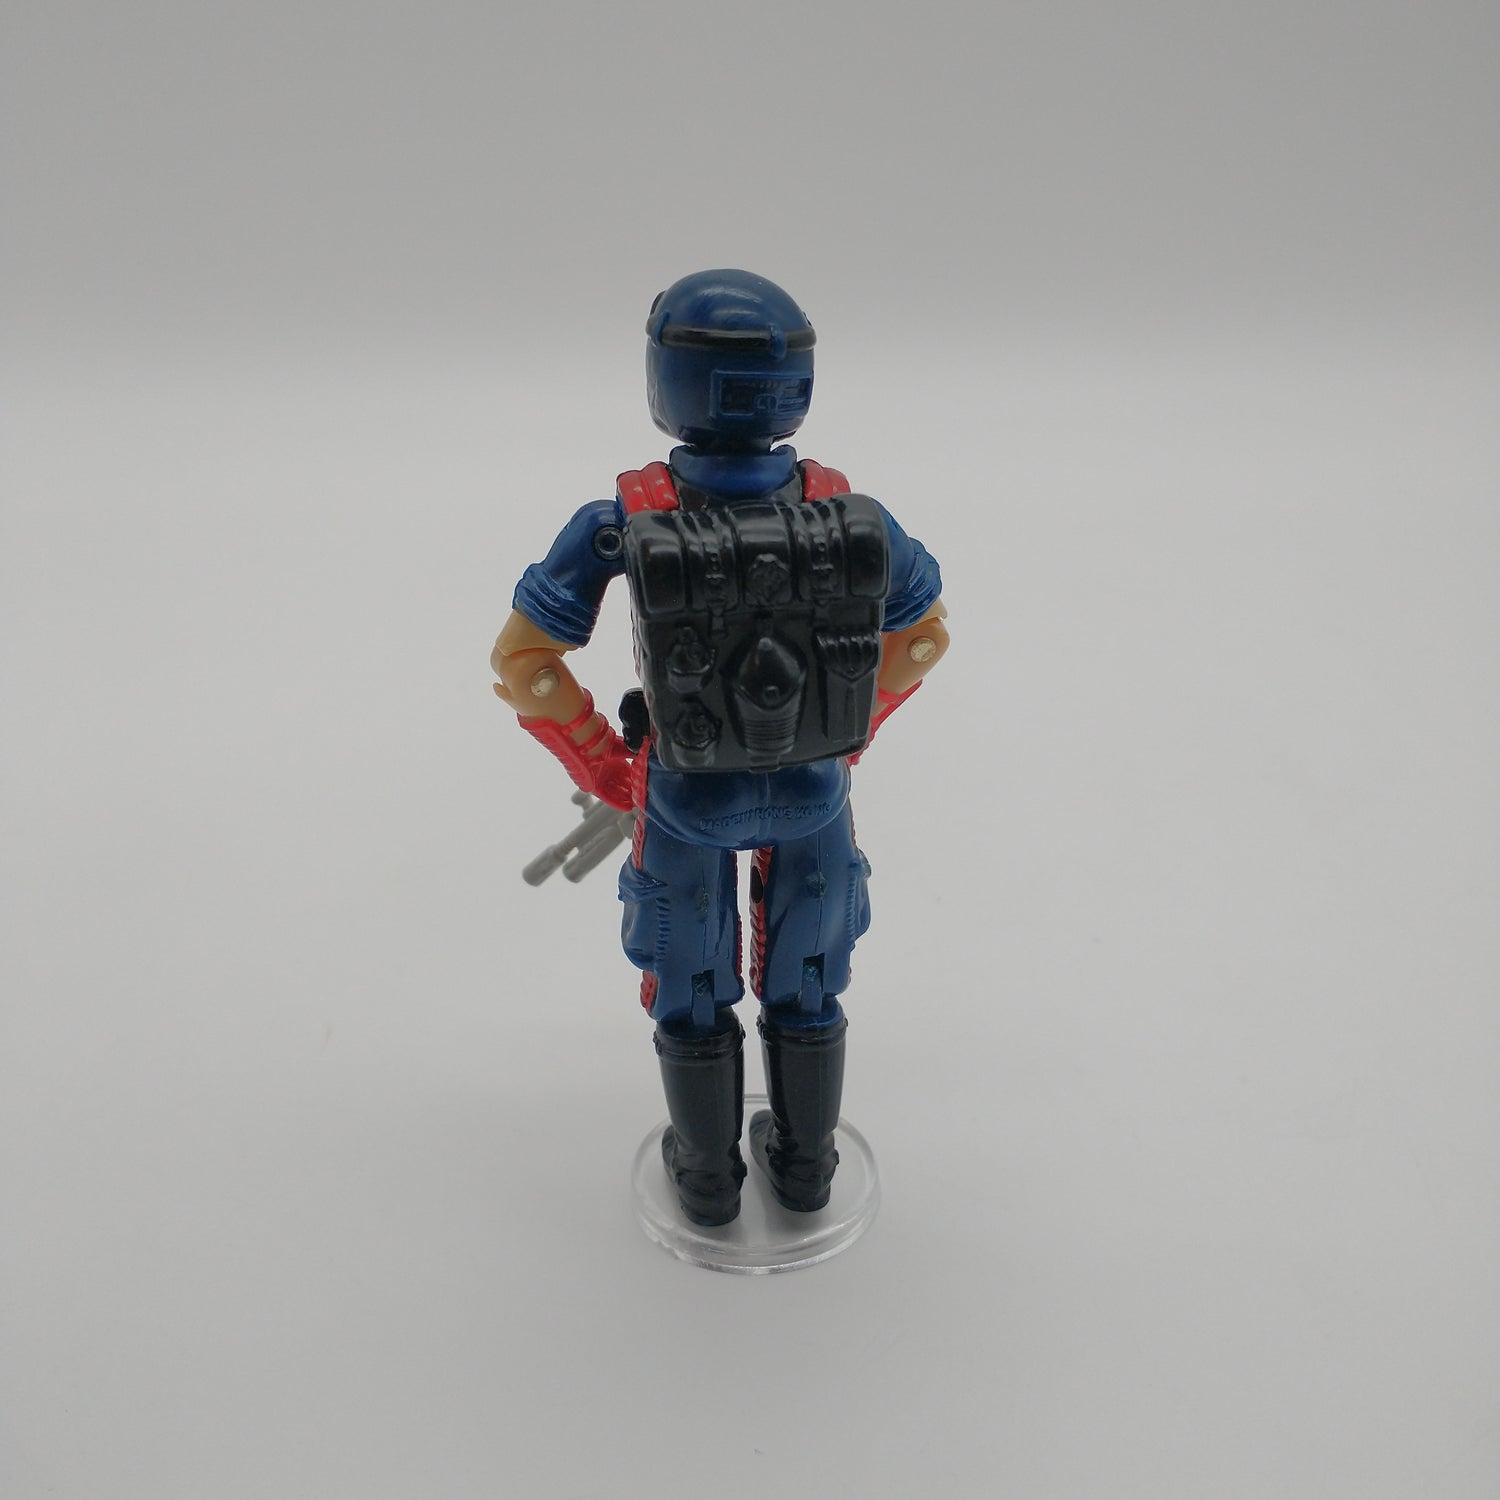 The back of the figure